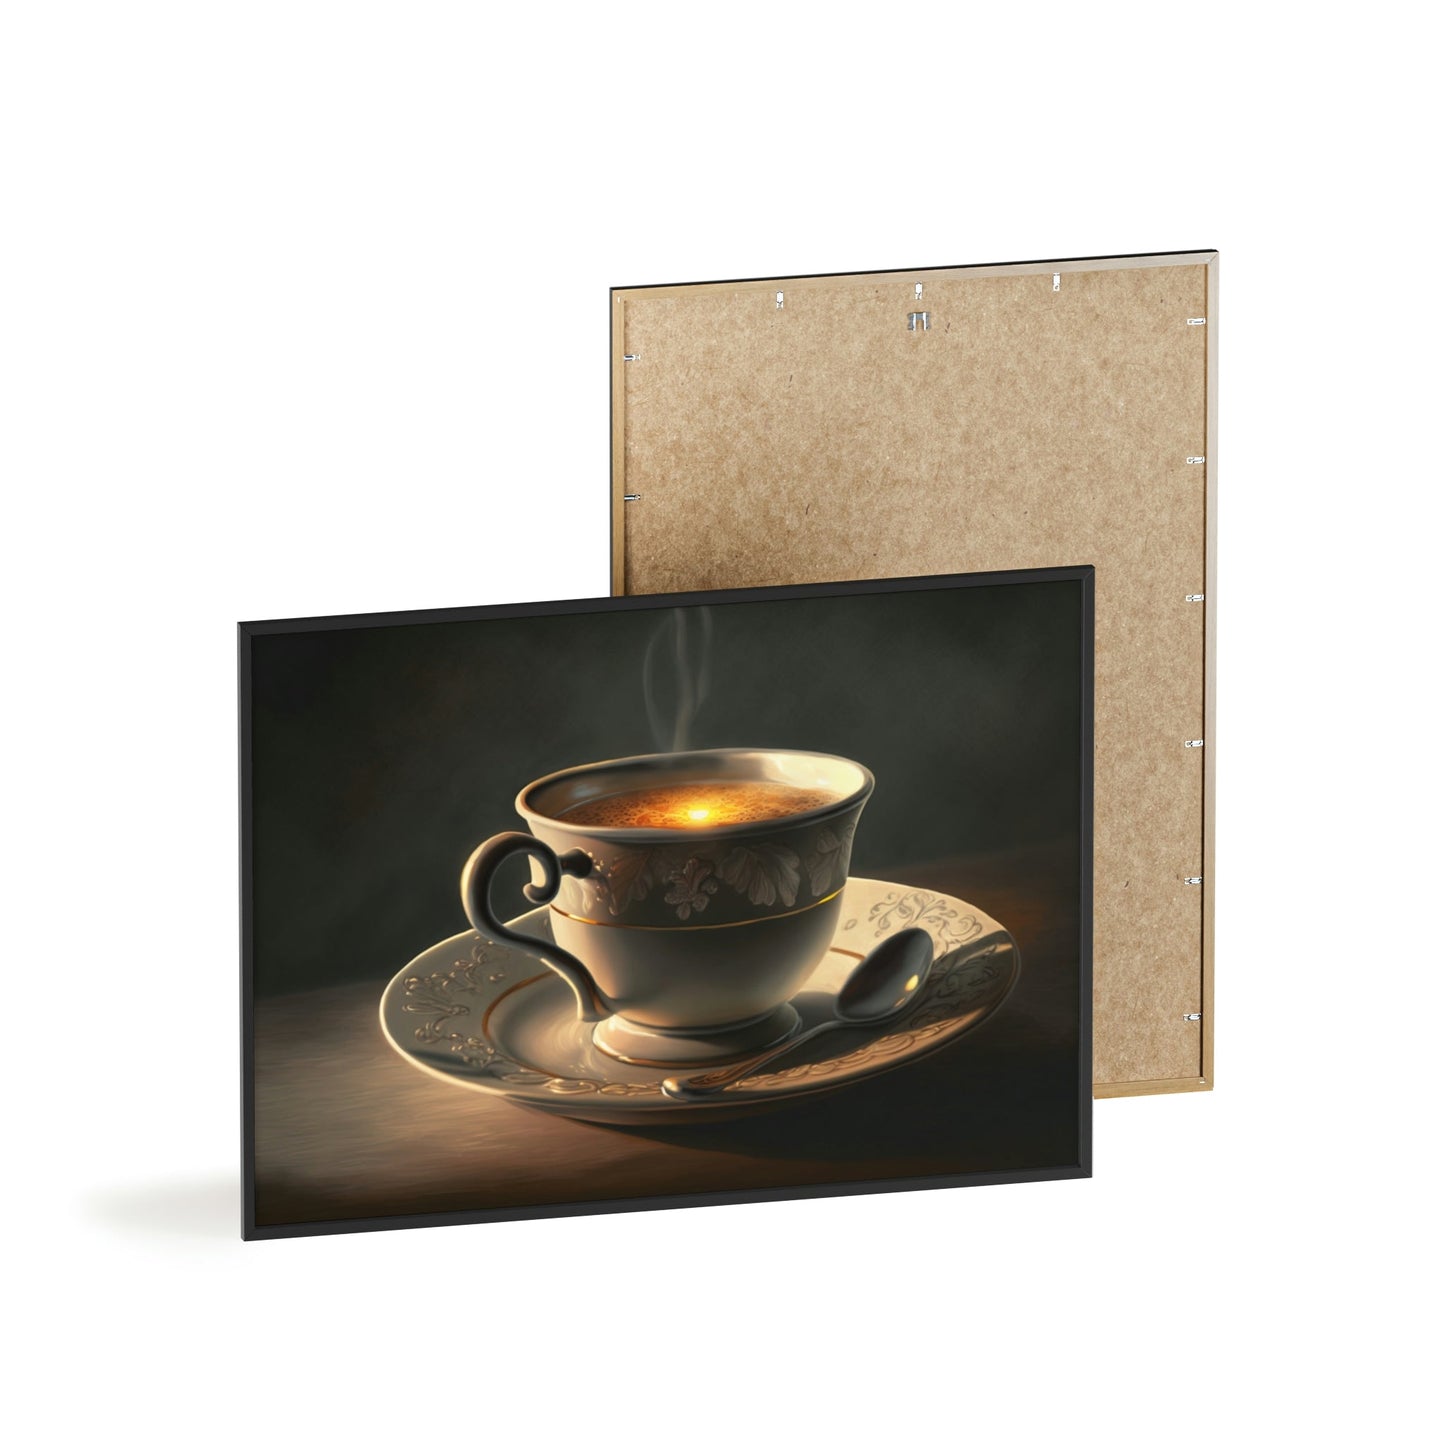 Coffee Delights: Artistic Depictions of Your Favorite Beverage on Canvas & Posters